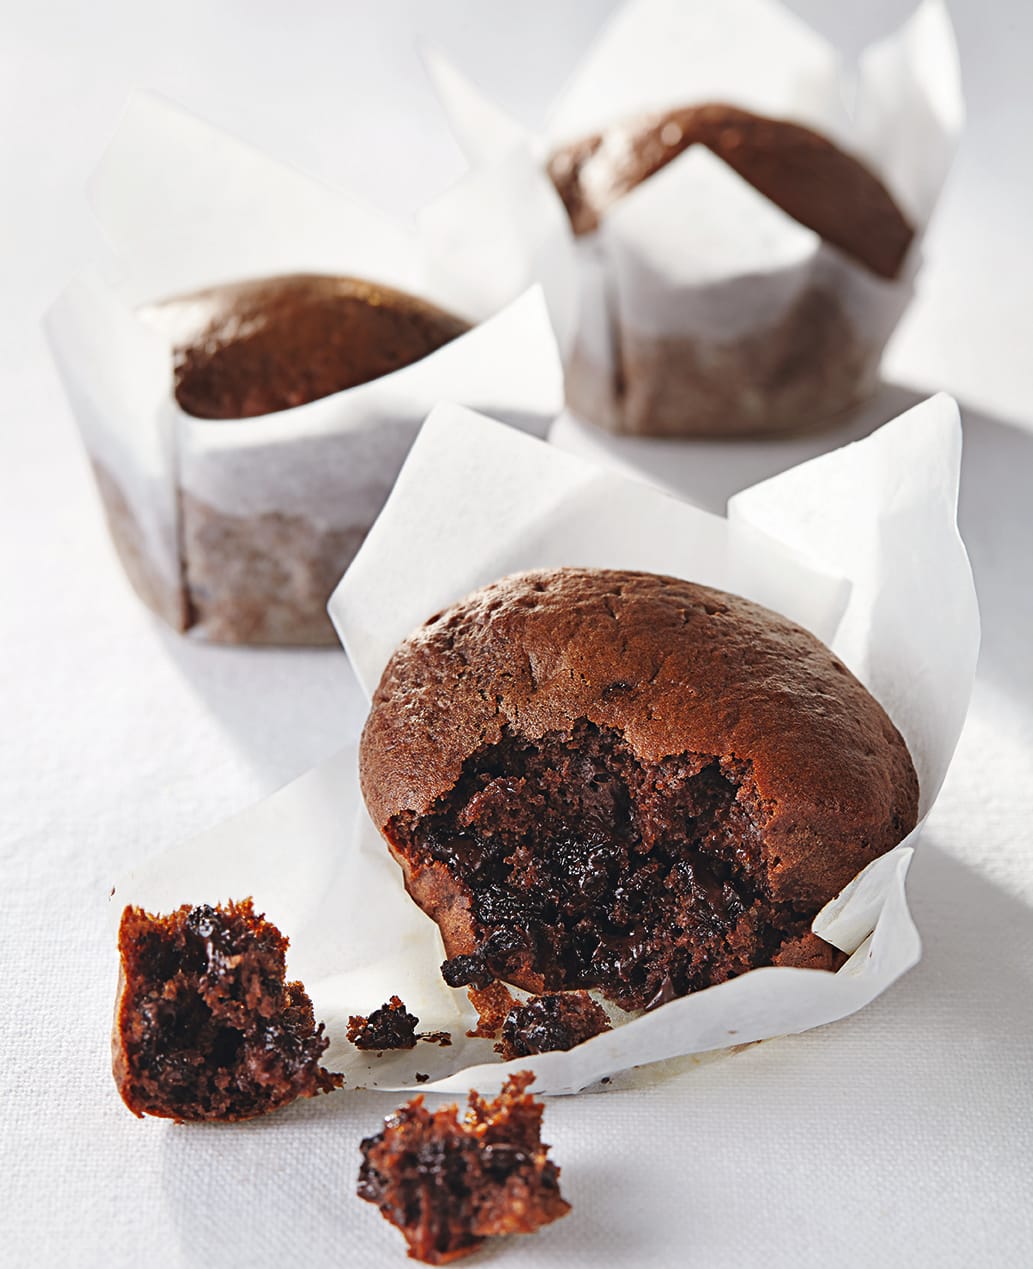 Photo of Chocolate cupcakes by WW